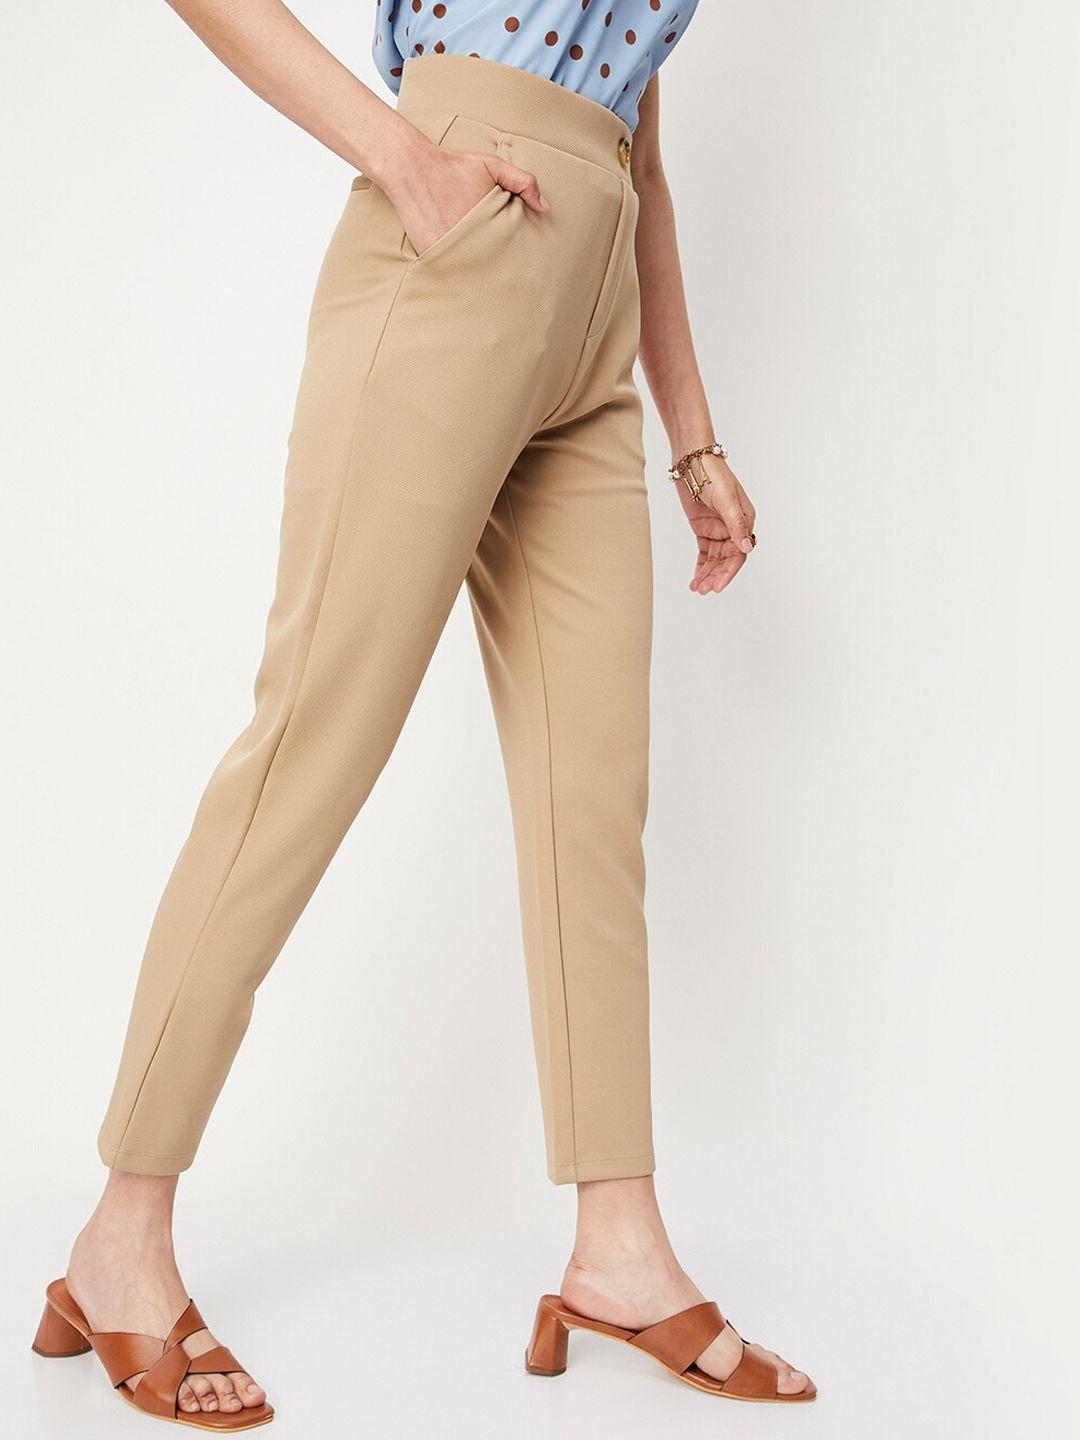 max-women-regular-fit-mid-rise-cropped-trousers